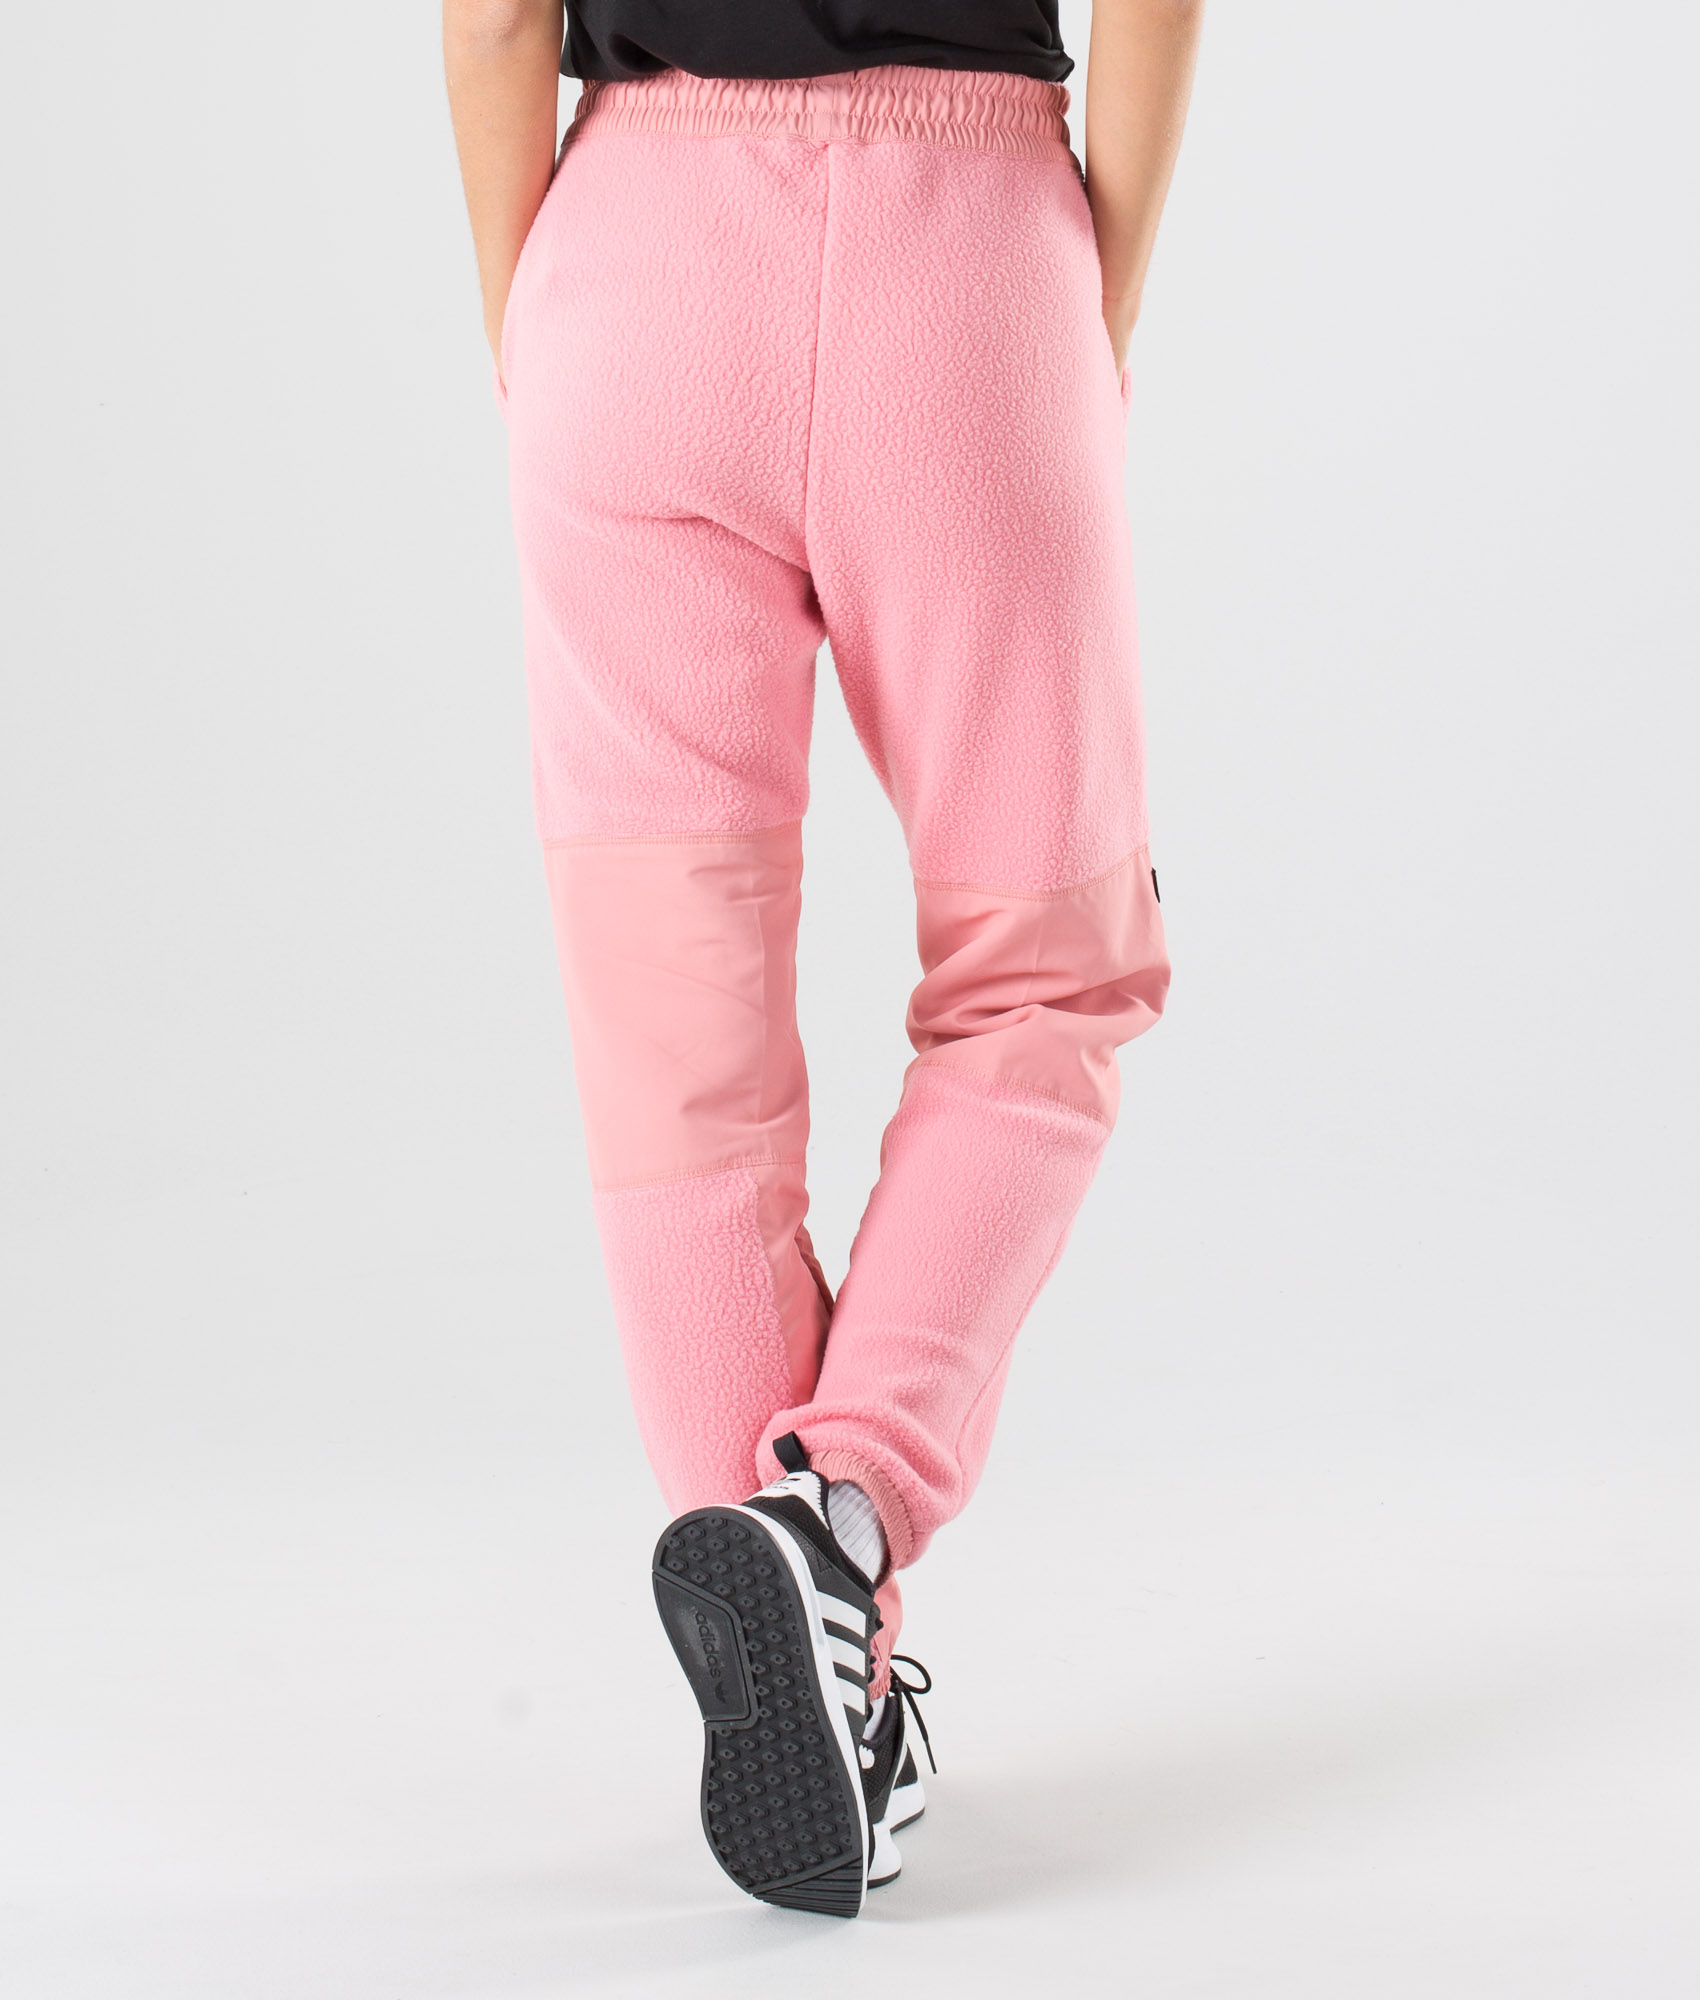 Extra High-Waisted Fleece Pants for Women | Old Navy